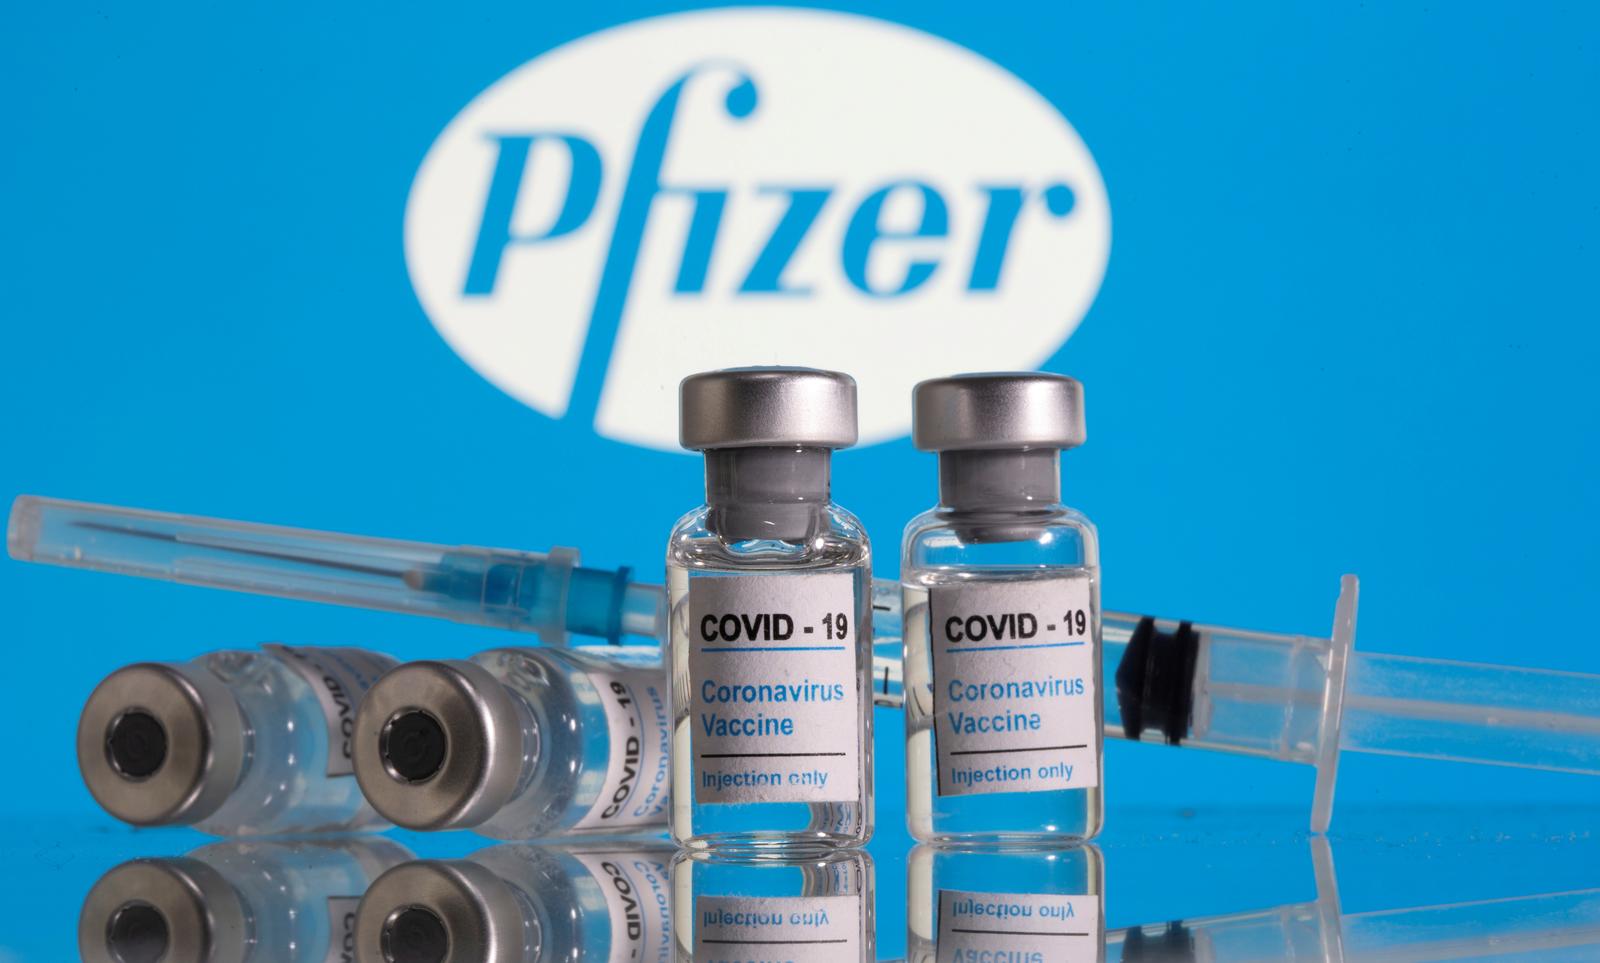 Israeli study finds 94% drop in symptomatic COVID-19 cases with Pfizer vaccine